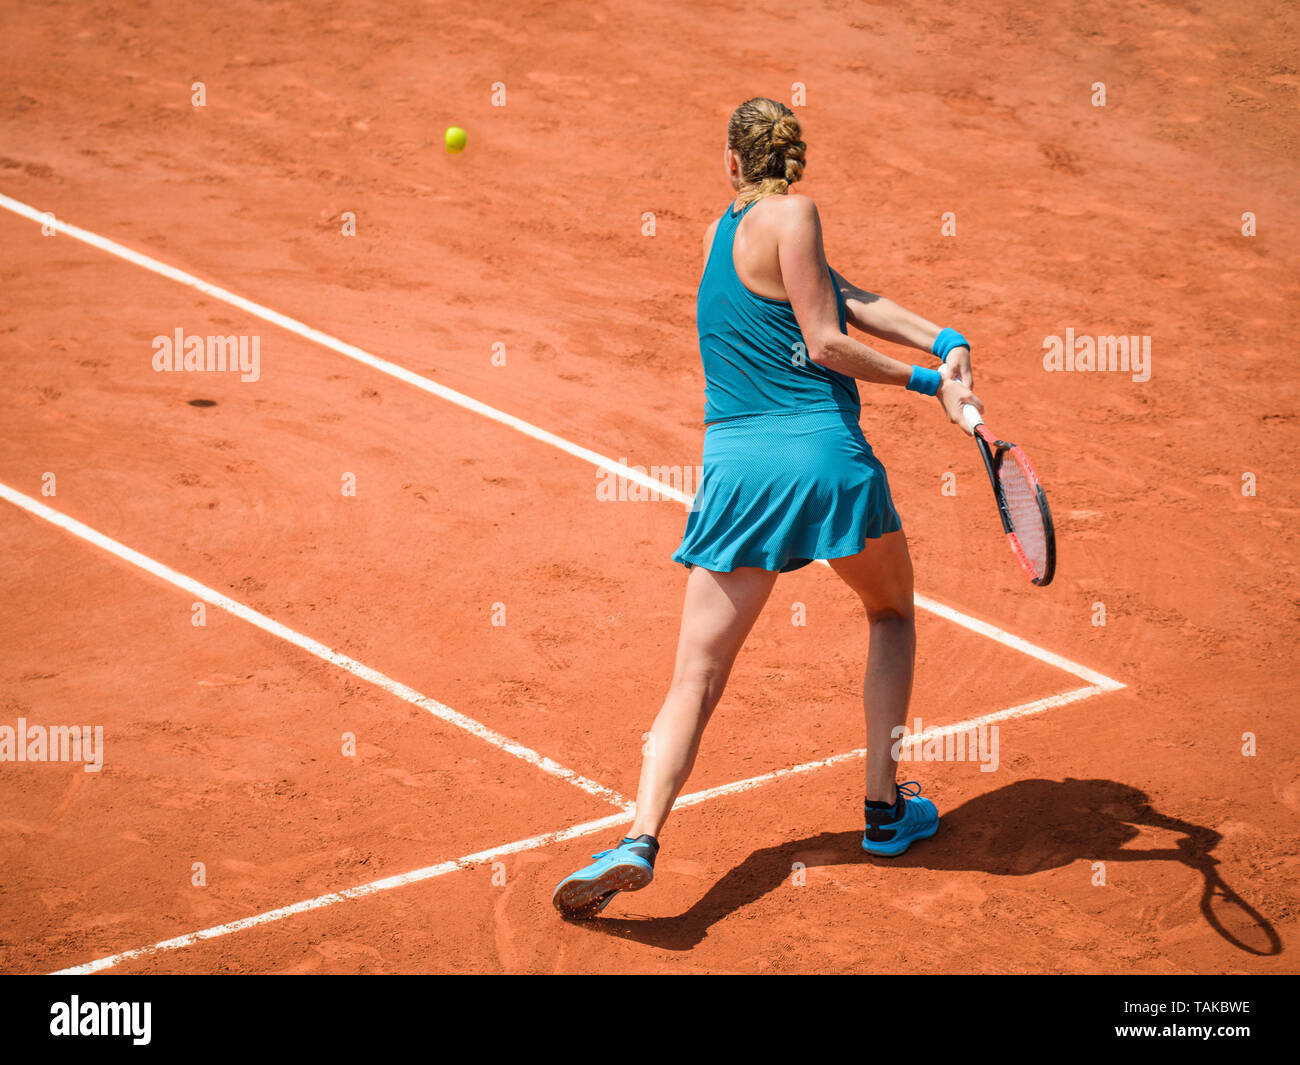 Back view  of a woman playing backhand in tennis outdoor competition game, running, professional Stock Photo